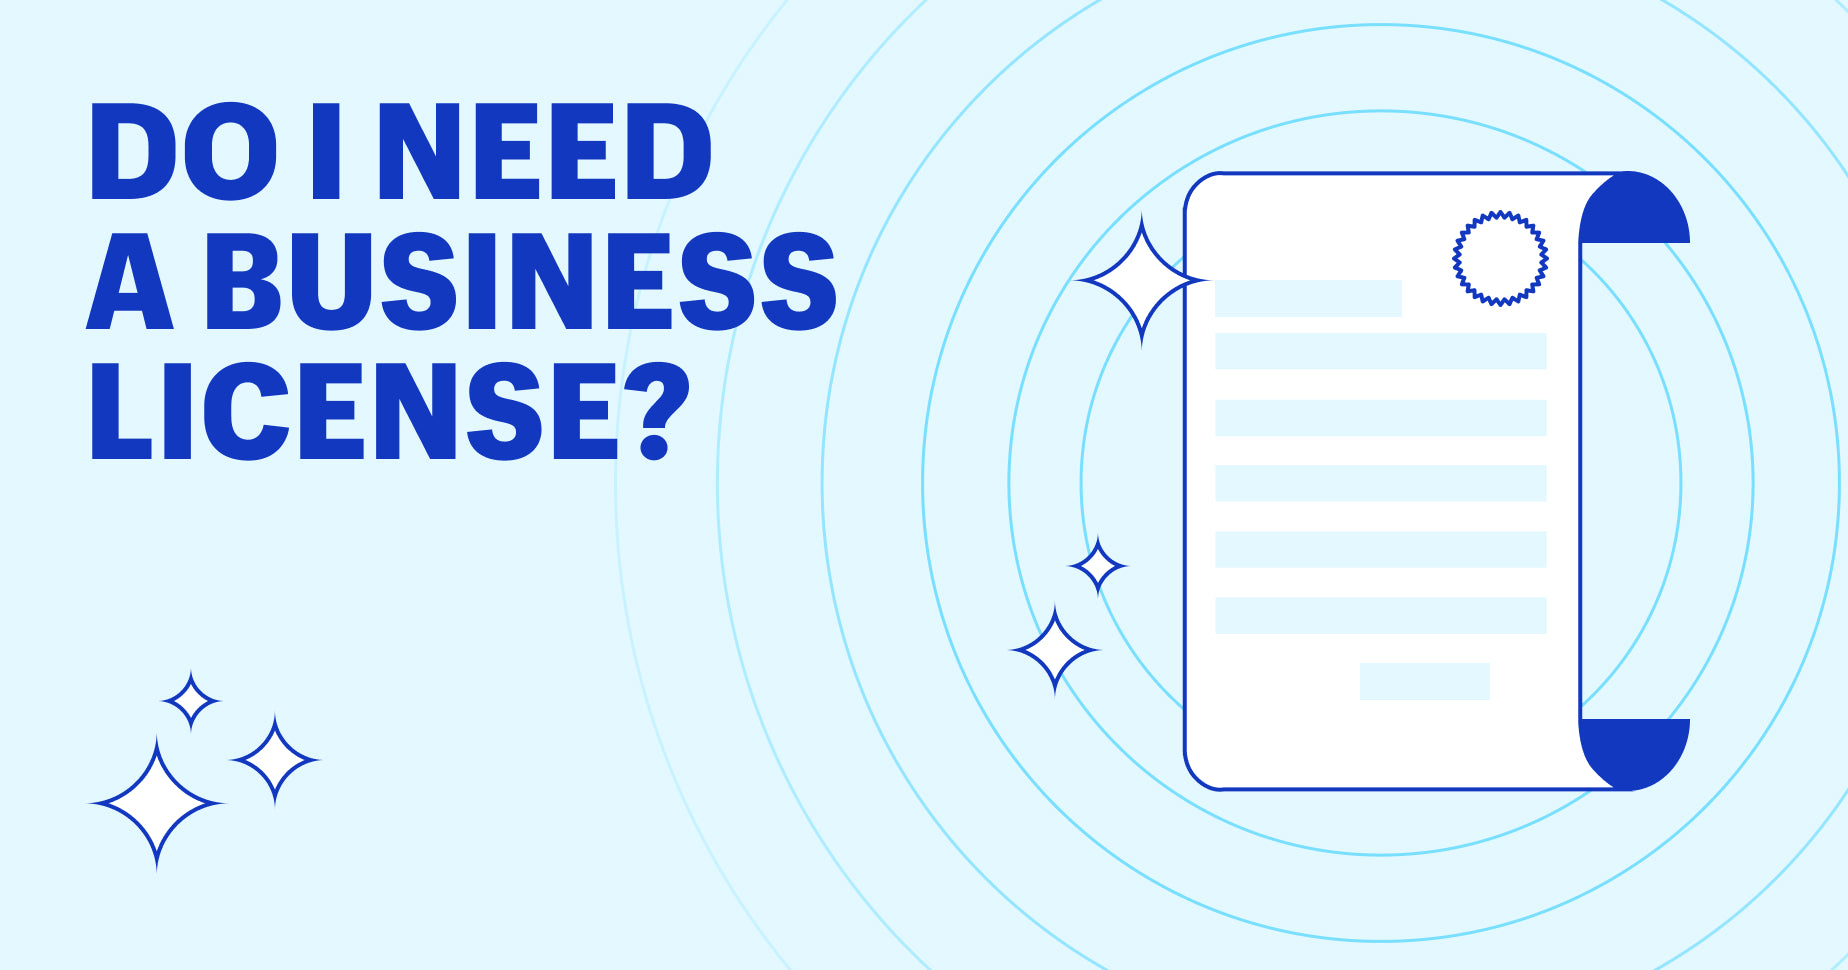 Light blue background with dark blue text that says "do I need a business license?" as well as a business license